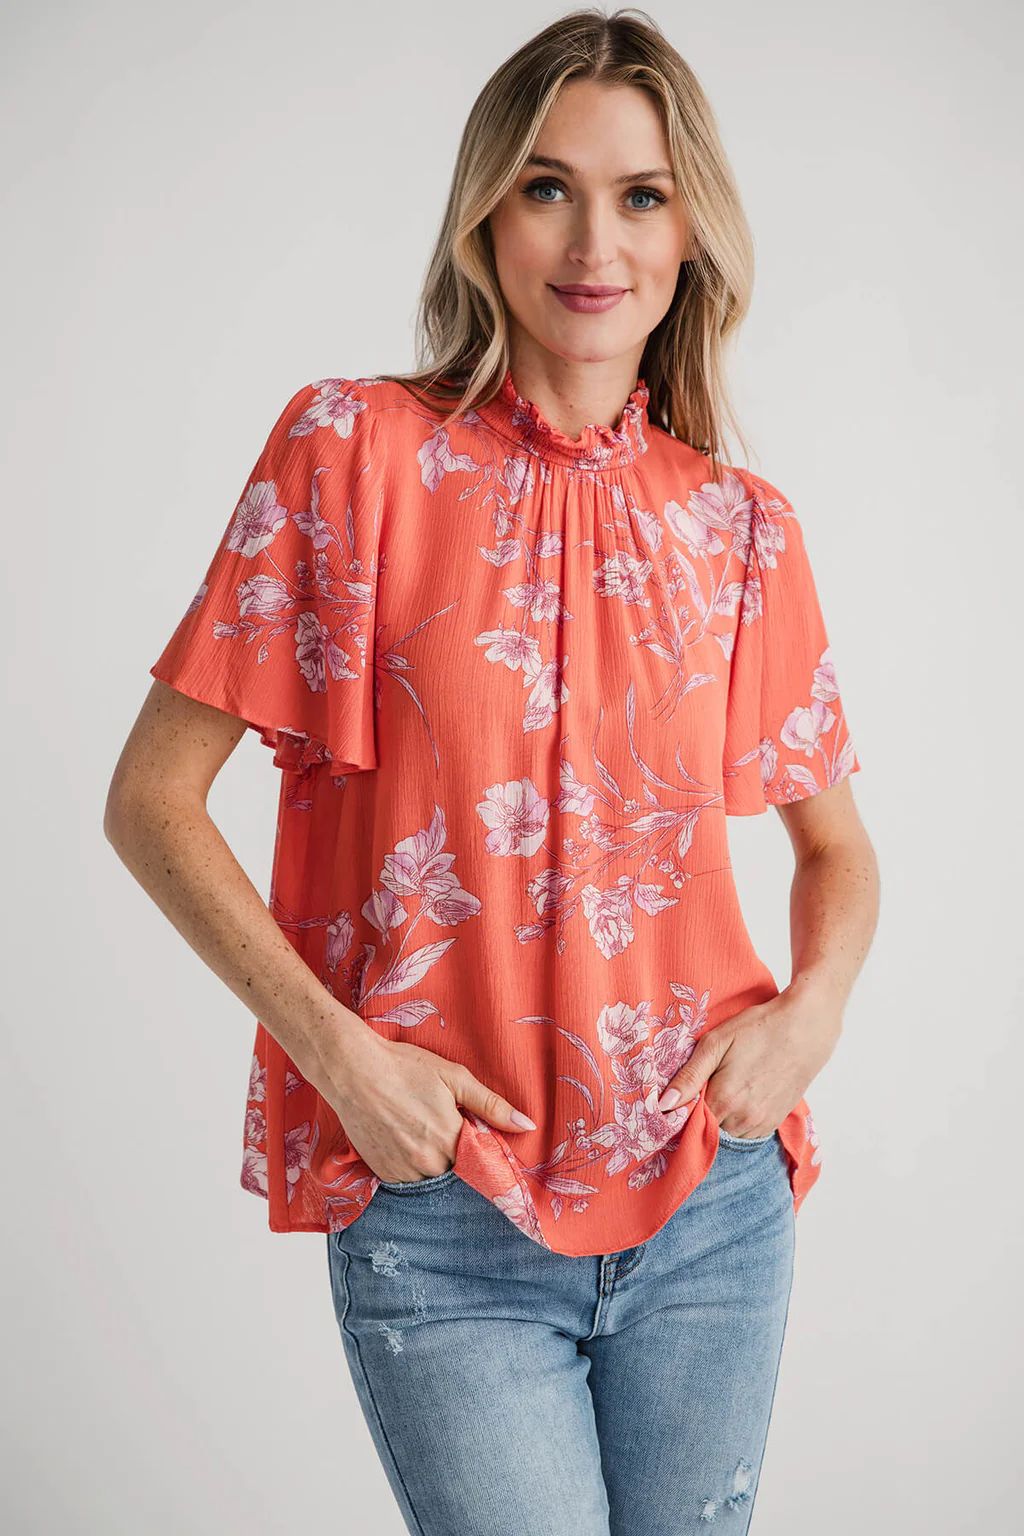 Easel Floral Printed Rayon Gauze Woven Top | Social Threads